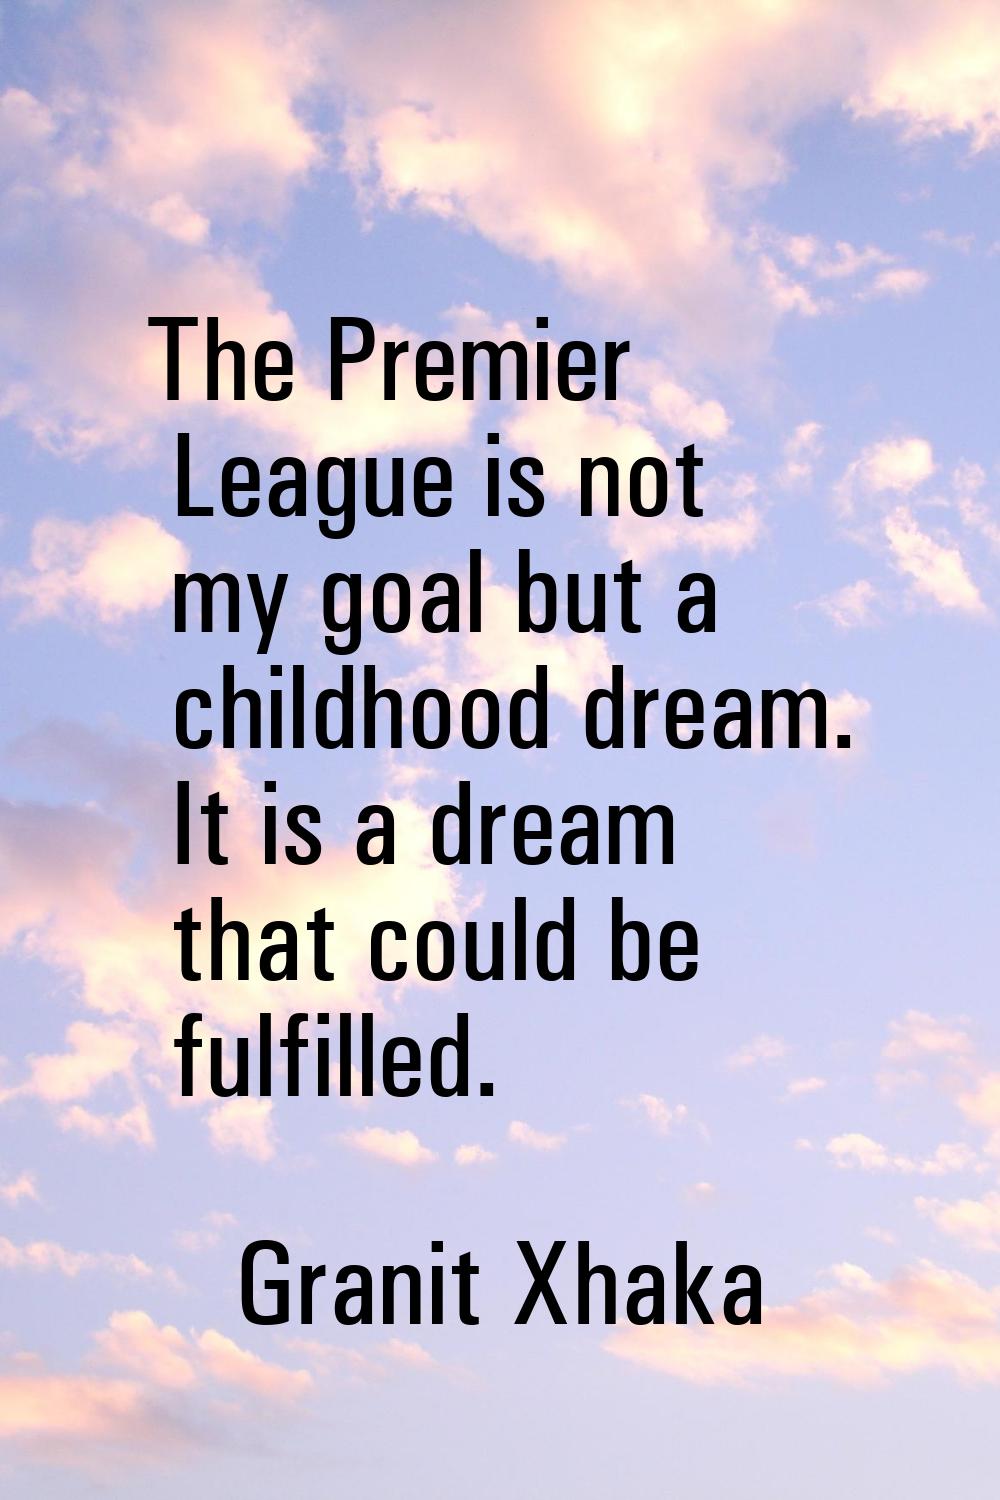 The Premier League is not my goal but a childhood dream. It is a dream that could be fulfilled.